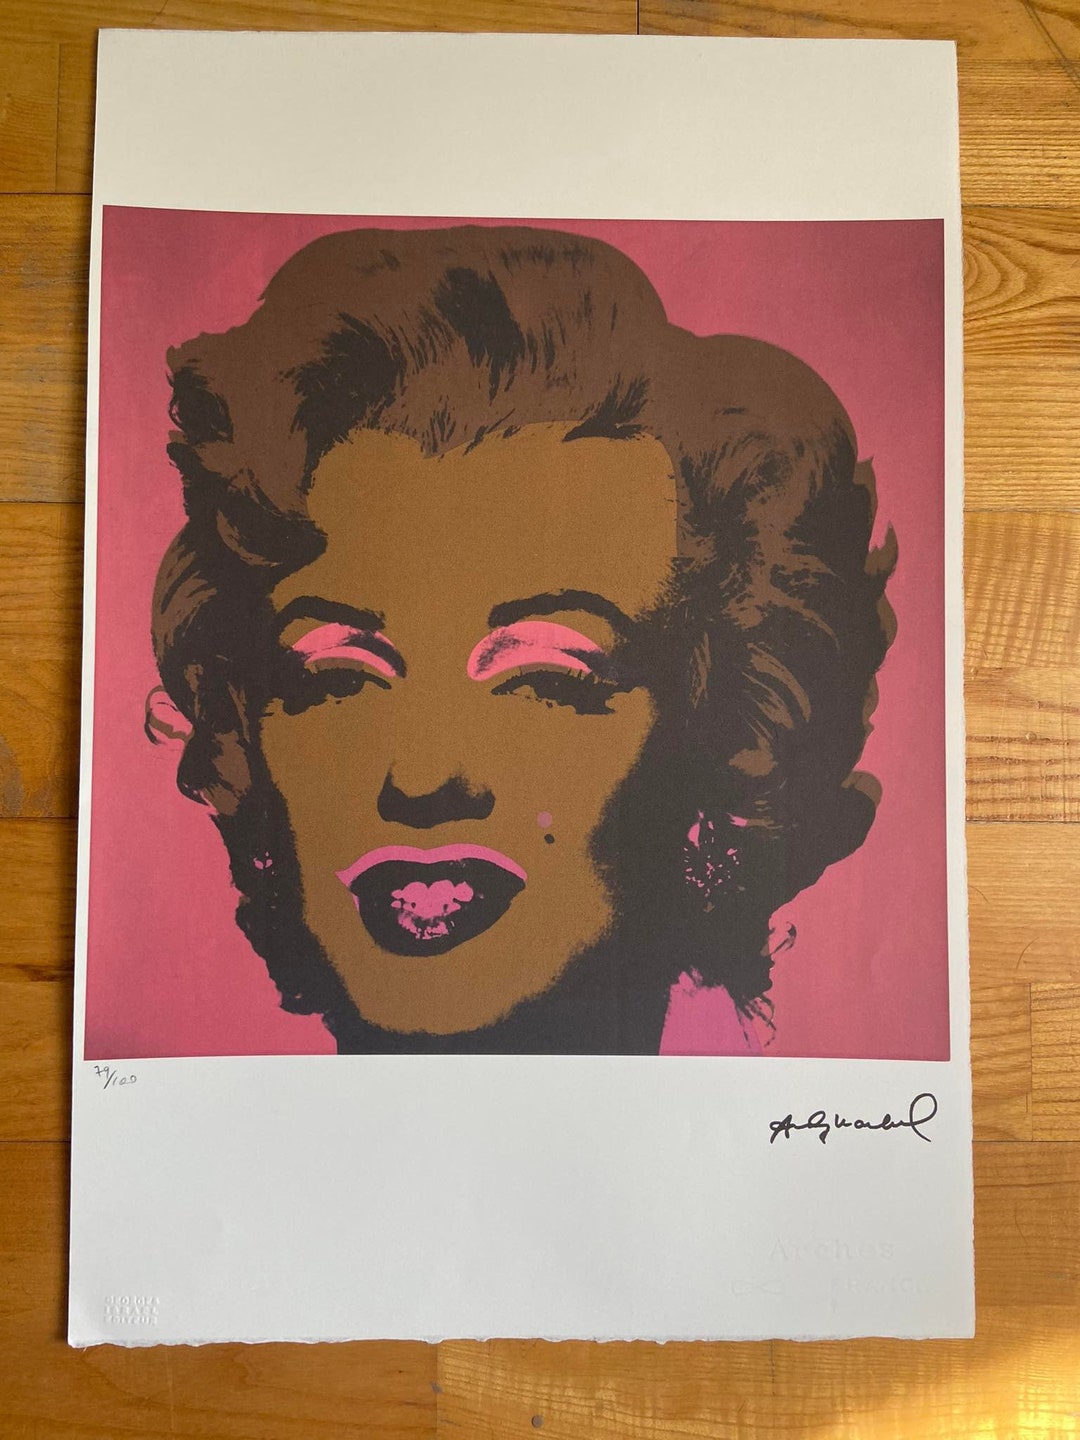 Andy Warhol Lithography Marilyn Monroe - Etsy